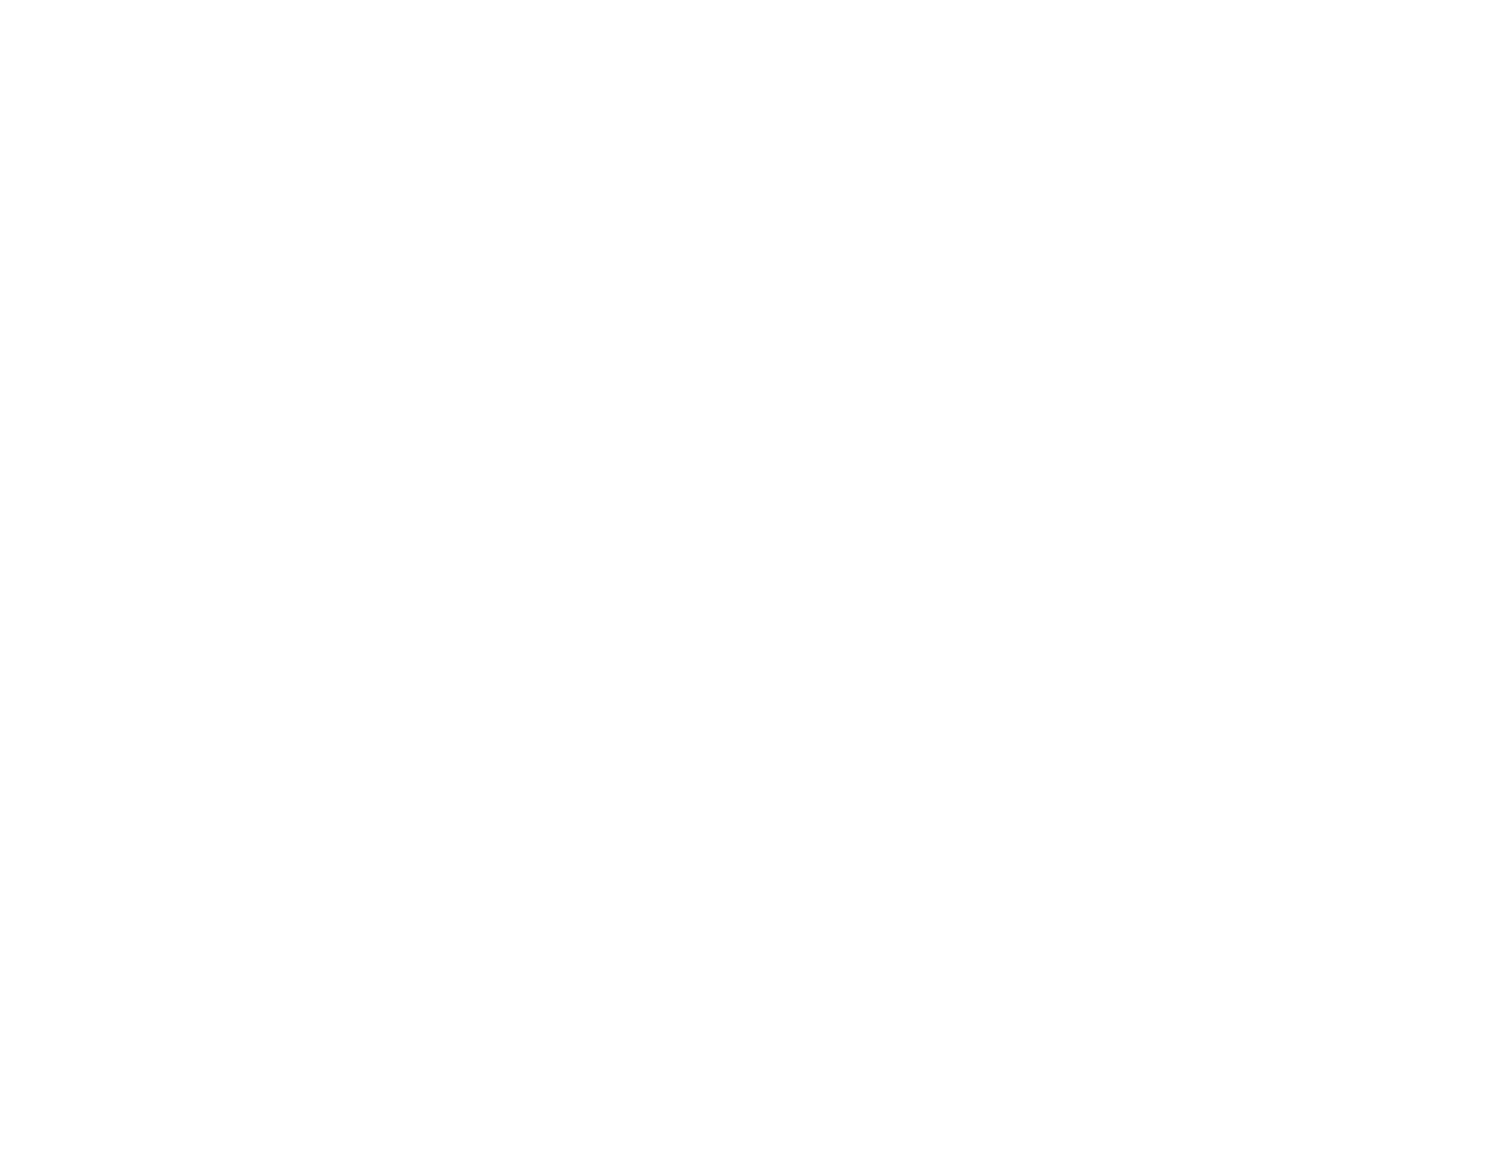 Rosie Frater-Taylor